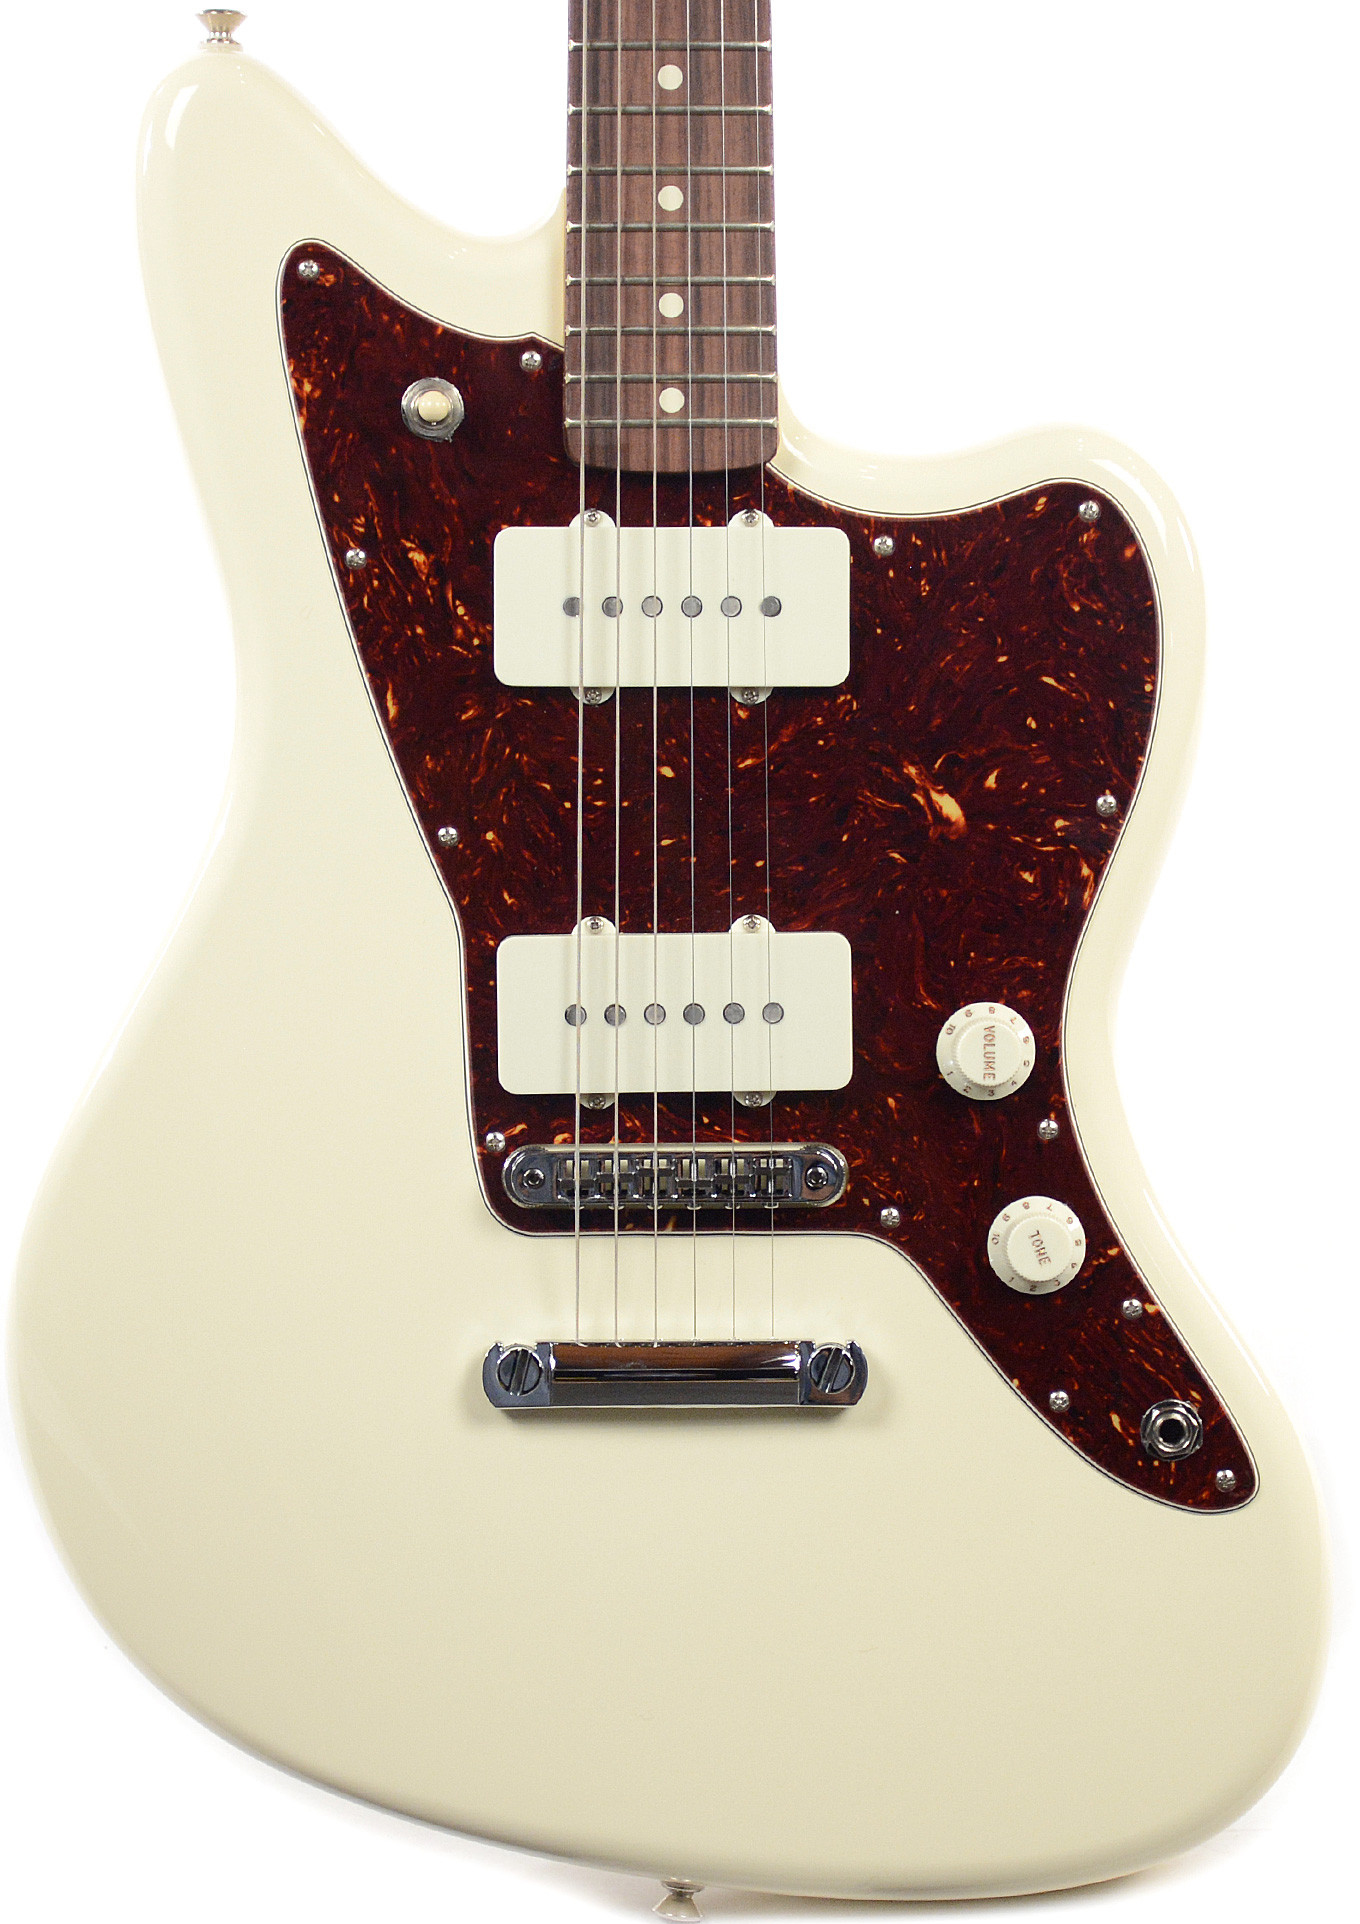 Fits US Jazzmaster With P90 Pickups Style No Rhythm Control Guitar Pickguard 4 Ply Brown Tortoise 